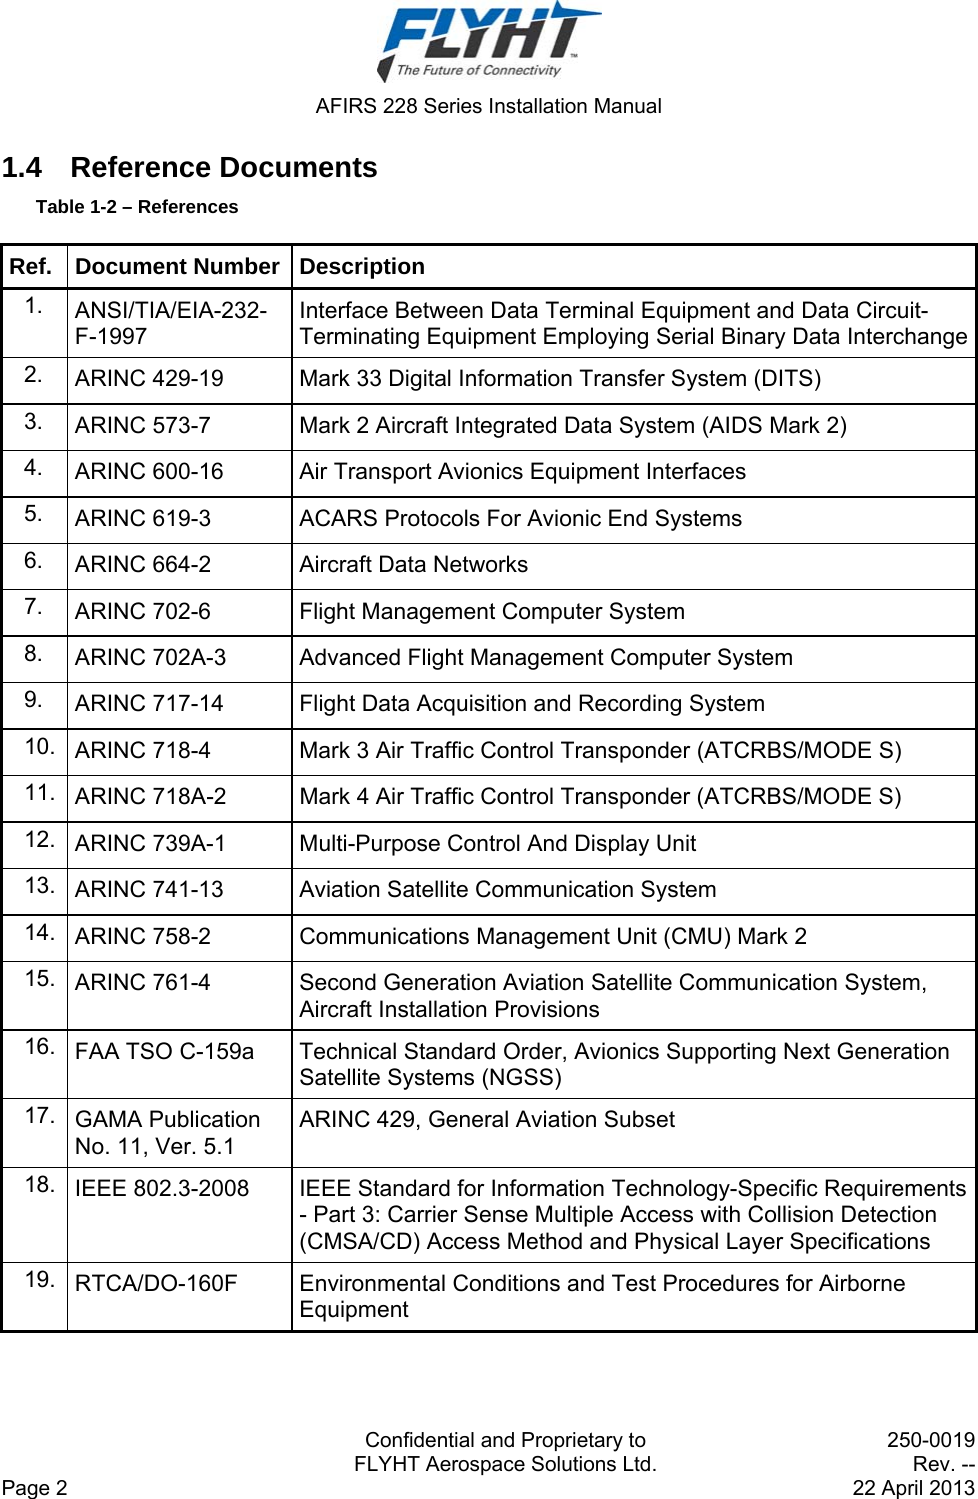  AFIRS 228 Series Installation Manual   Confidential and Proprietary to  250-0019   FLYHT Aerospace Solutions Ltd.  Rev. -- Page 2    22 April 2013 1.4 Reference Documents Table 1-2 – References Ref. Document Number Description 1.  ANSI/TIA/EIA-232-F-1997 Interface Between Data Terminal Equipment and Data Circuit-Terminating Equipment Employing Serial Binary Data Interchange2.  ARINC 429-19  Mark 33 Digital Information Transfer System (DITS) 3.  ARINC 573-7  Mark 2 Aircraft Integrated Data System (AIDS Mark 2) 4.  ARINC 600-16  Air Transport Avionics Equipment Interfaces 5.  ARINC 619-3  ACARS Protocols For Avionic End Systems 6.  ARINC 664-2  Aircraft Data Networks 7.  ARINC 702-6  Flight Management Computer System 8.  ARINC 702A-3  Advanced Flight Management Computer System 9.  ARINC 717-14  Flight Data Acquisition and Recording System 10.  ARINC 718-4  Mark 3 Air Traffic Control Transponder (ATCRBS/MODE S) 11.  ARINC 718A-2  Mark 4 Air Traffic Control Transponder (ATCRBS/MODE S) 12.  ARINC 739A-1  Multi-Purpose Control And Display Unit 13.  ARINC 741-13  Aviation Satellite Communication System 14.  ARINC 758-2  Communications Management Unit (CMU) Mark 2 15.  ARINC 761-4  Second Generation Aviation Satellite Communication System, Aircraft Installation Provisions 16.  FAA TSO C-159a  Technical Standard Order, Avionics Supporting Next Generation Satellite Systems (NGSS) 17.  GAMA Publication No. 11, Ver. 5.1 ARINC 429, General Aviation Subset 18.  IEEE 802.3-2008  IEEE Standard for Information Technology-Specific Requirements - Part 3: Carrier Sense Multiple Access with Collision Detection (CMSA/CD) Access Method and Physical Layer Specifications 19.  RTCA/DO-160F  Environmental Conditions and Test Procedures for Airborne Equipment 